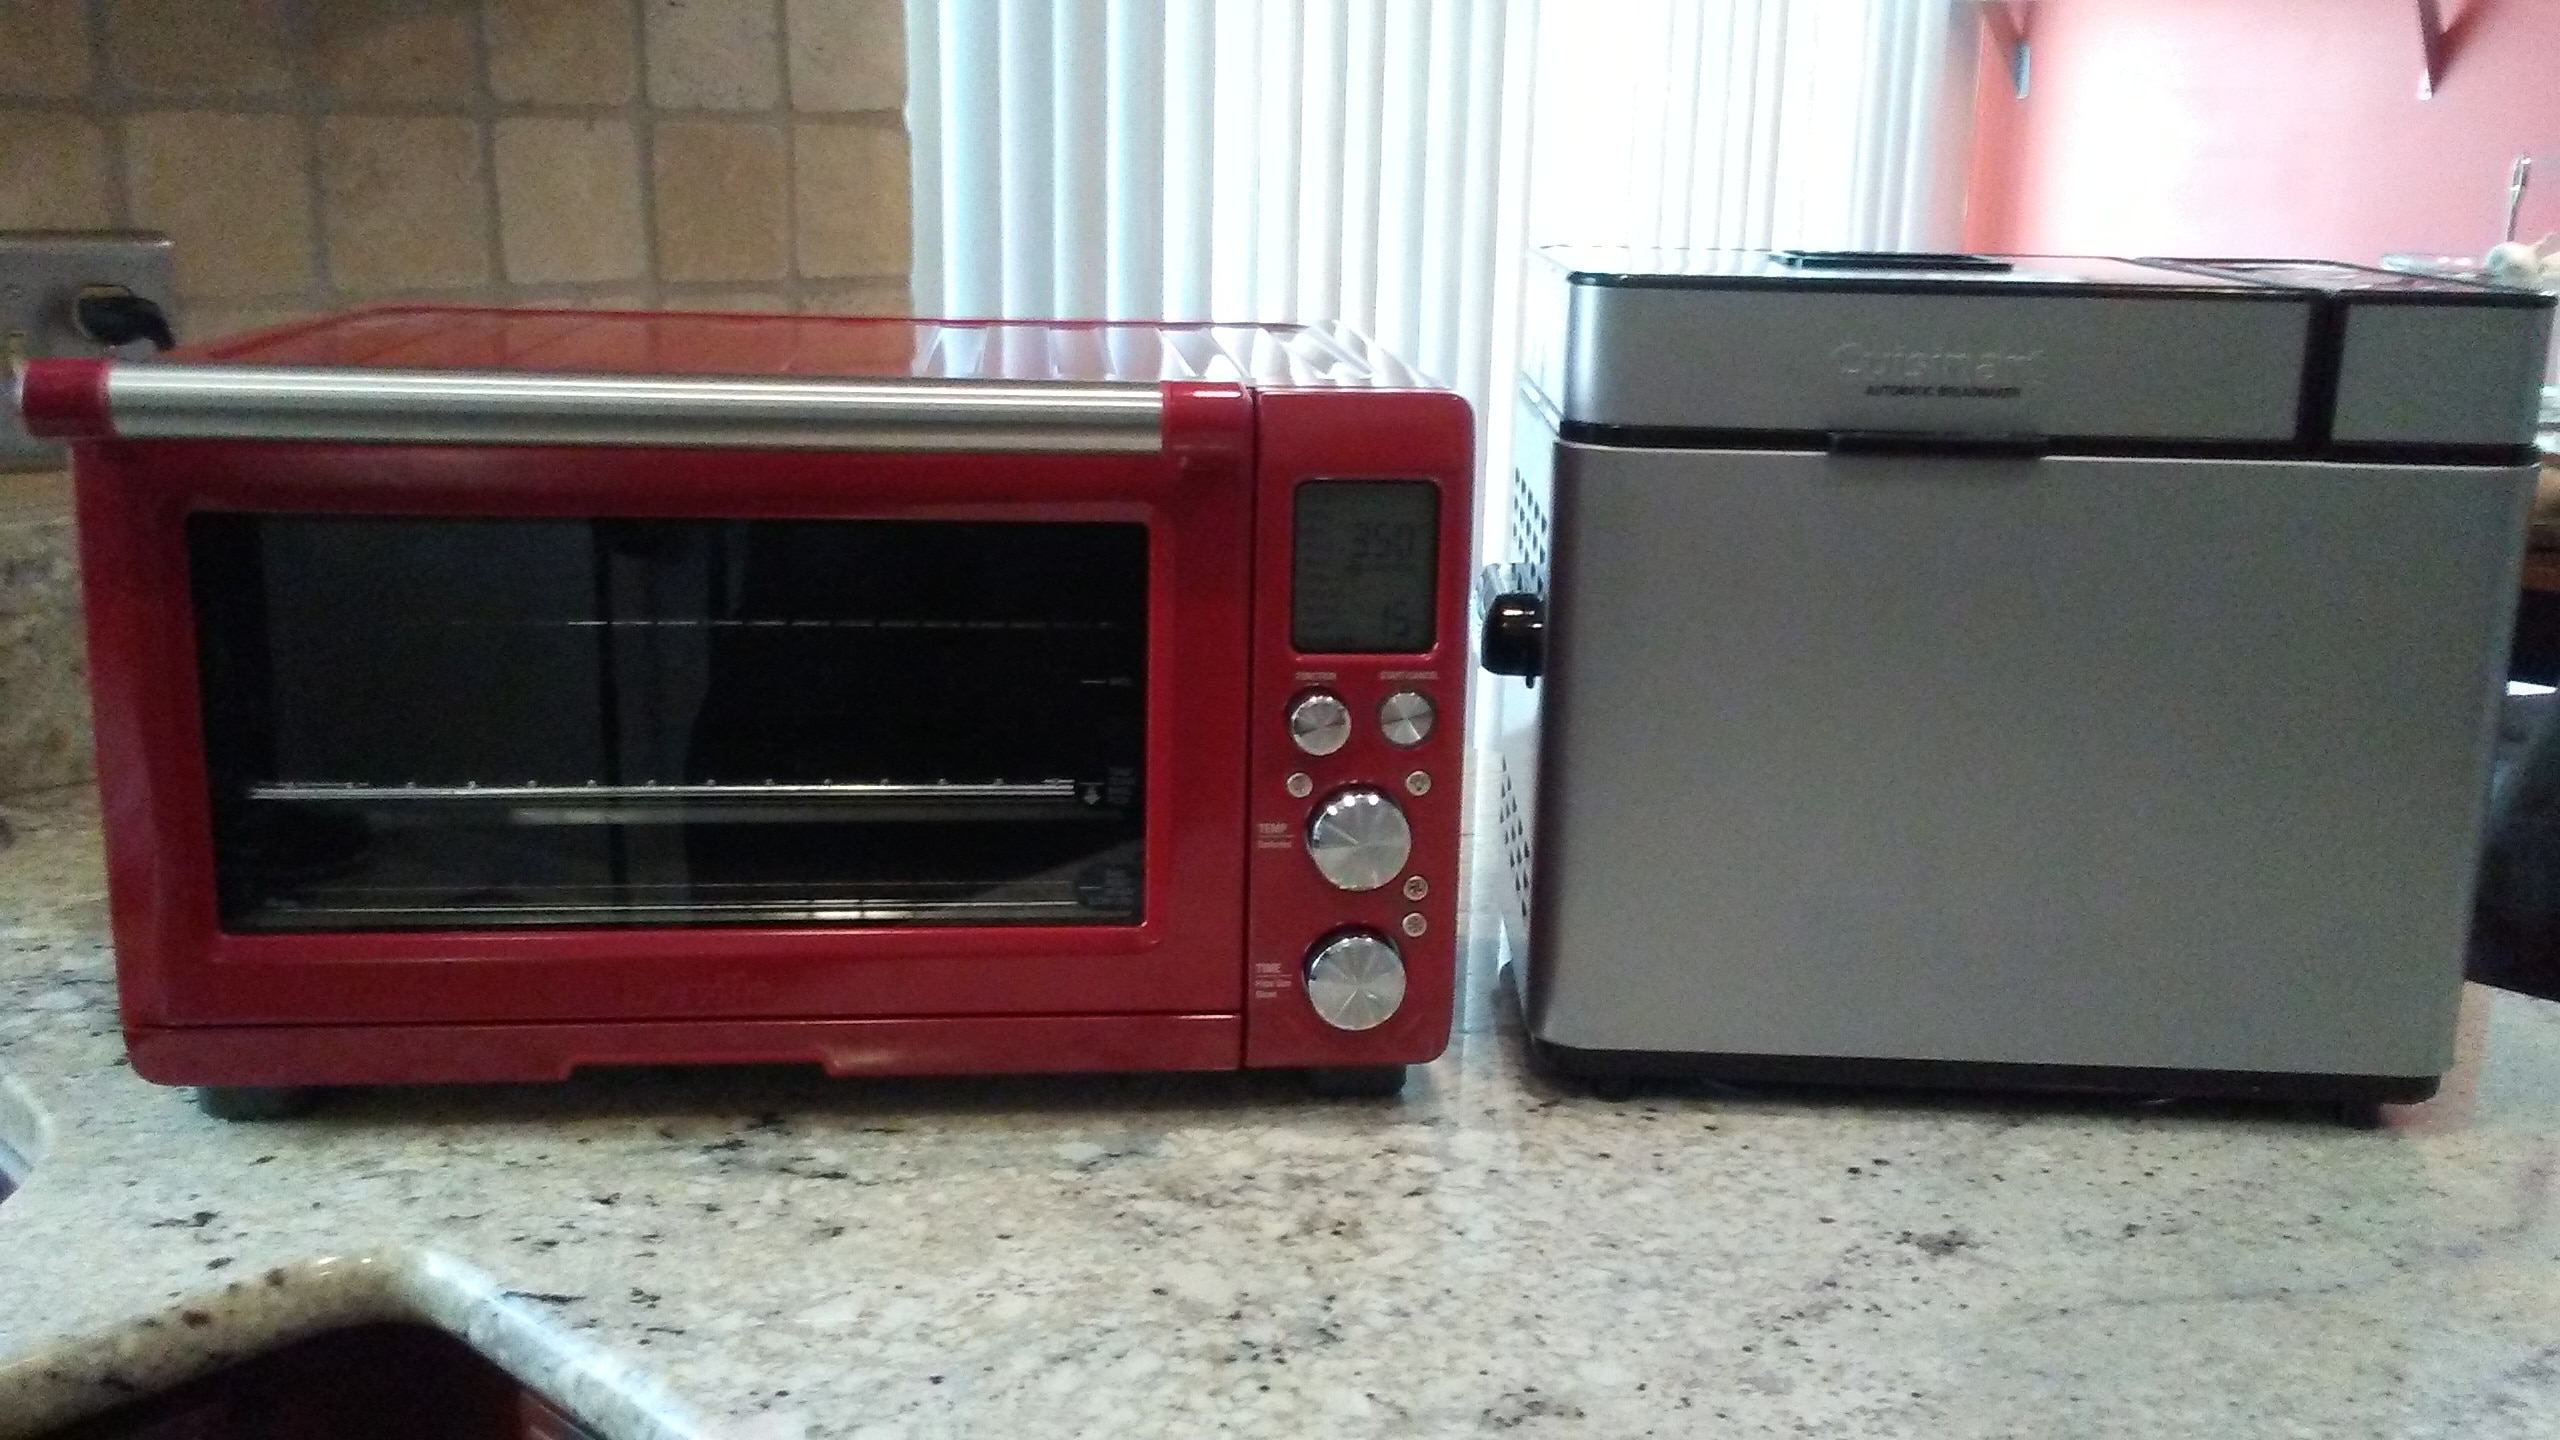 This is an image of Cuisinart CBK-100 bread maker compared to the size of our toaster oven.